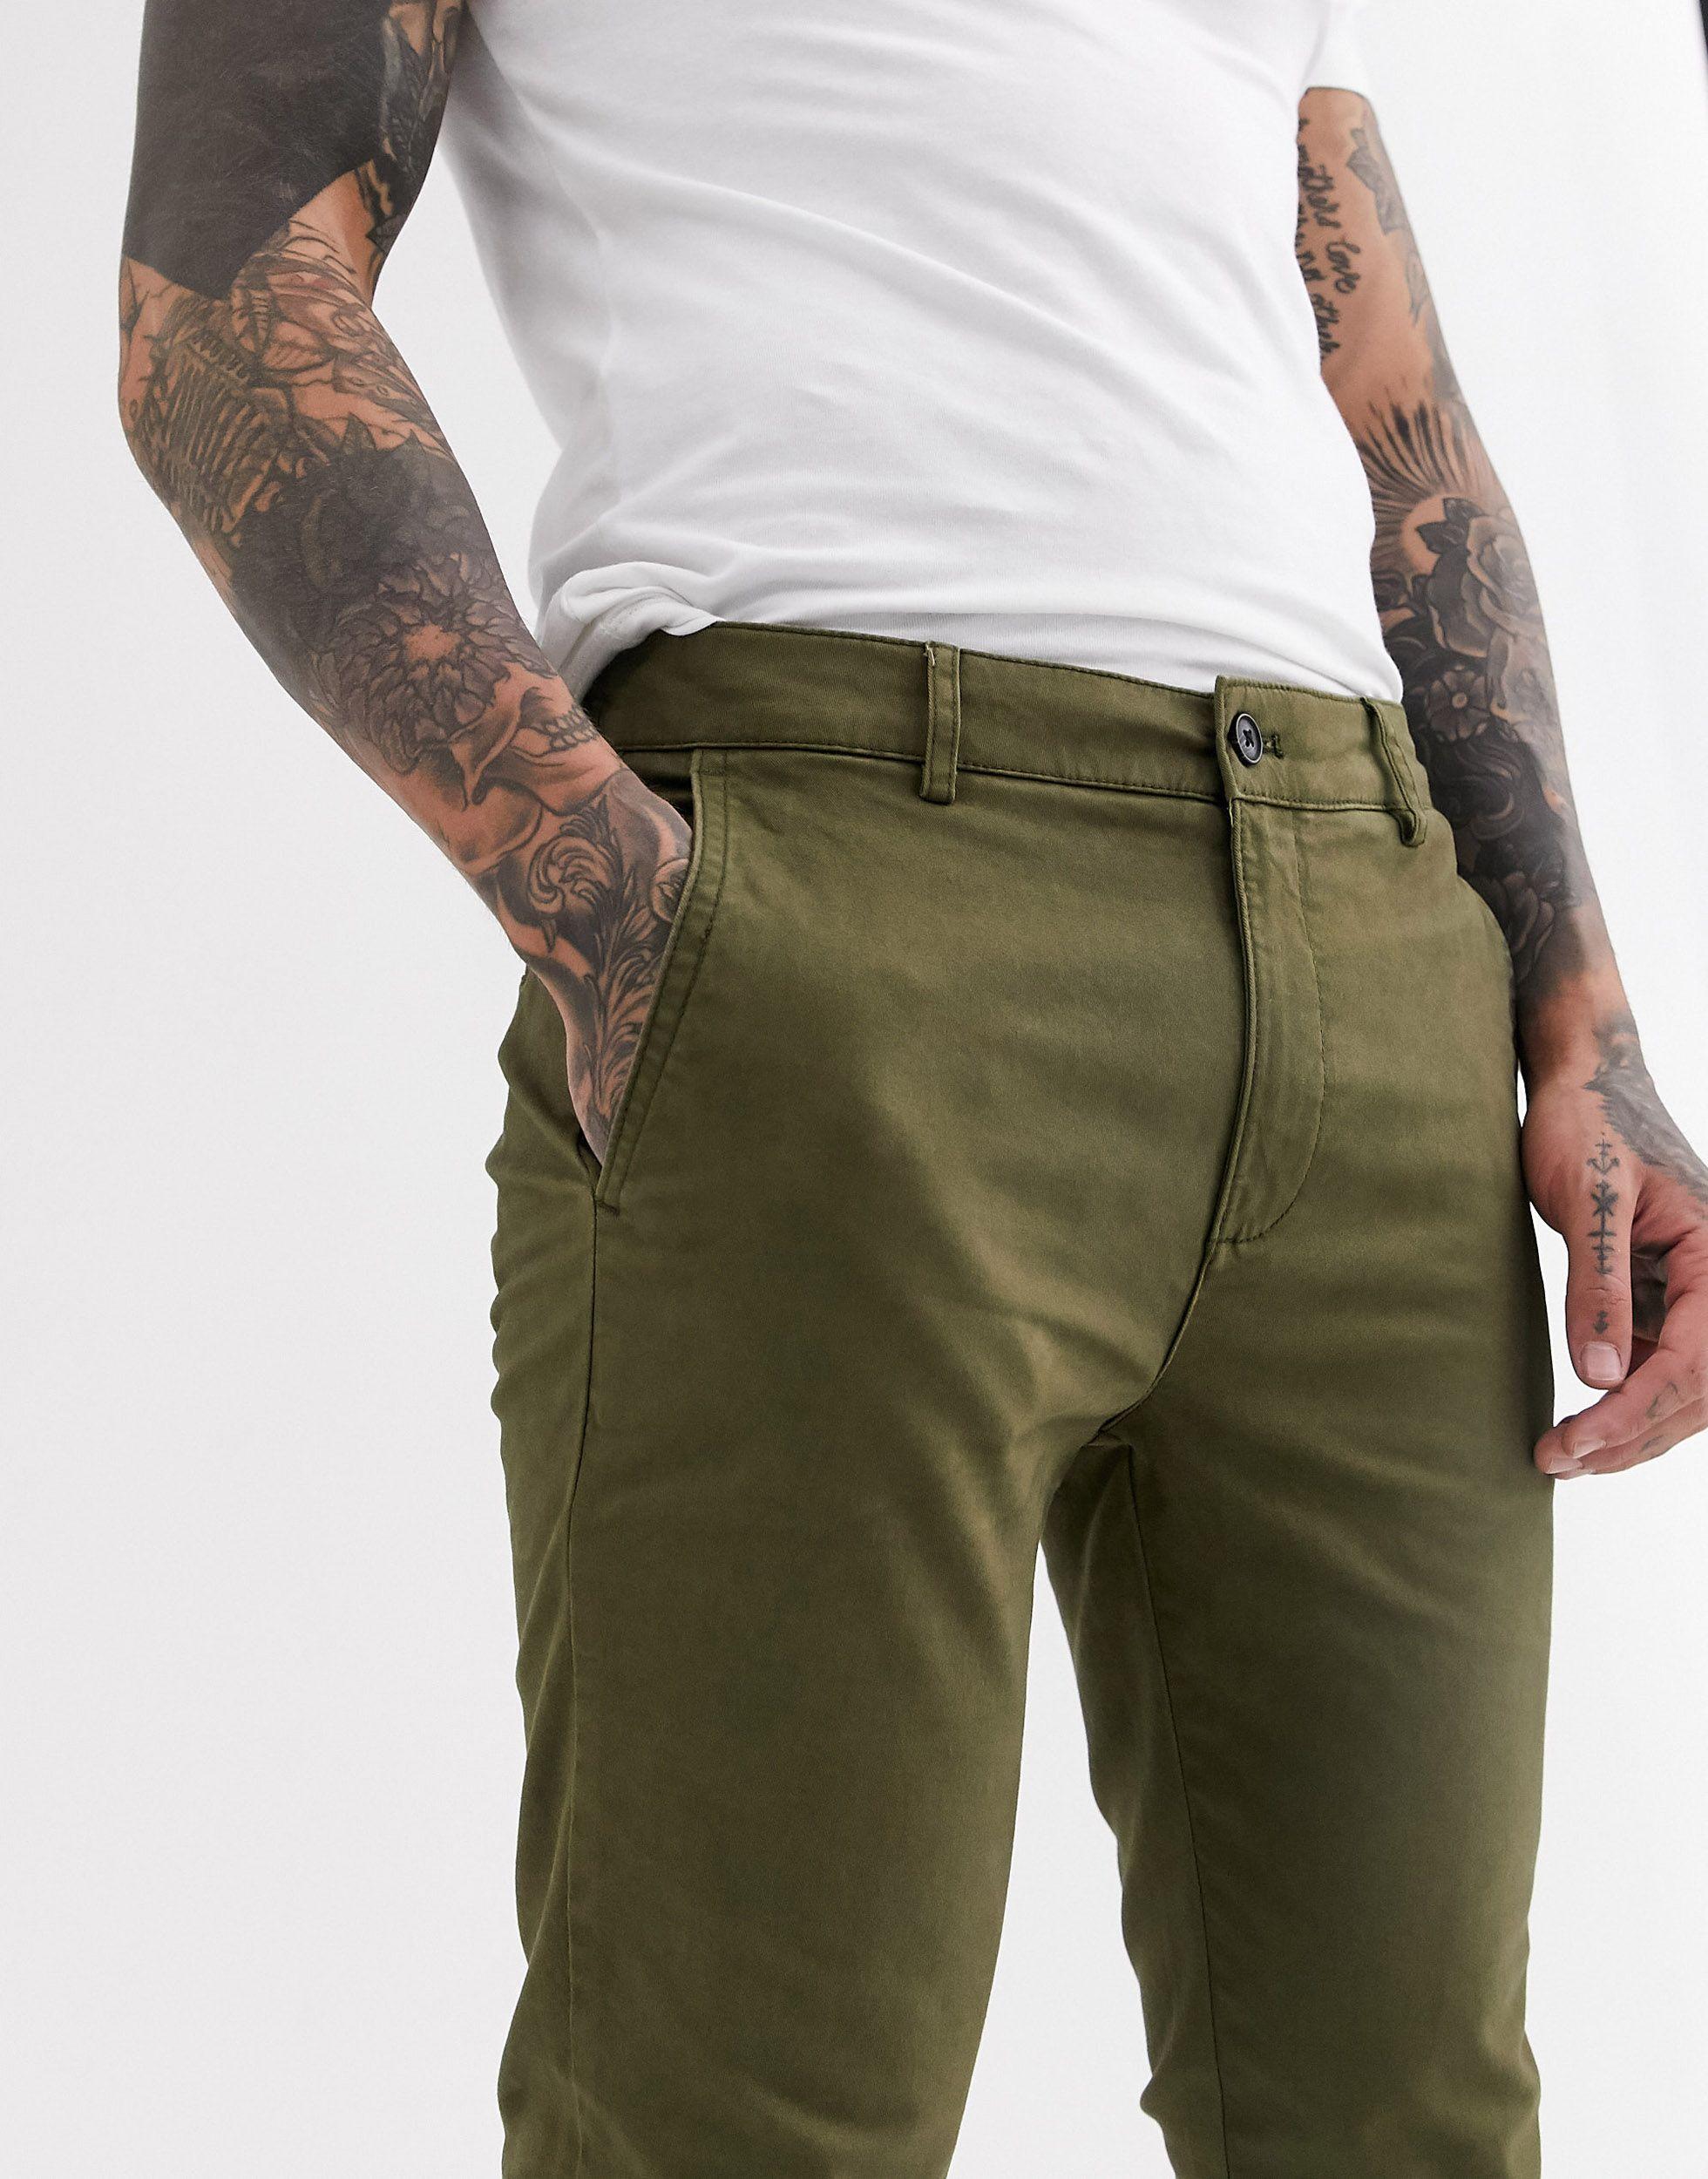 TOPMAN Cotton Skinny Chinos in Green for Men - Lyst